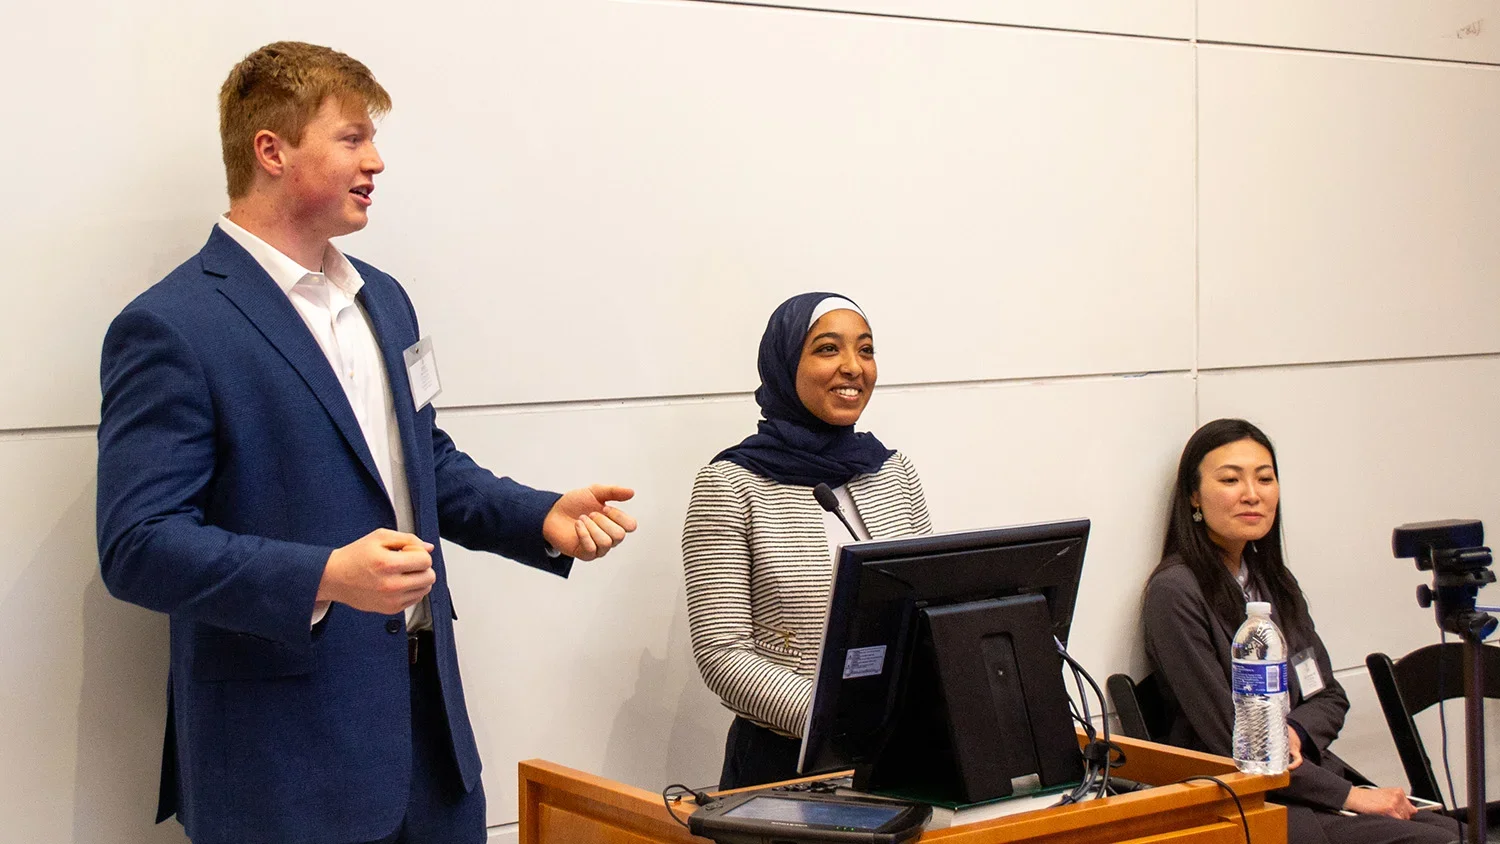 Student presenters stand at the podium during the "Food as Medicine" conference